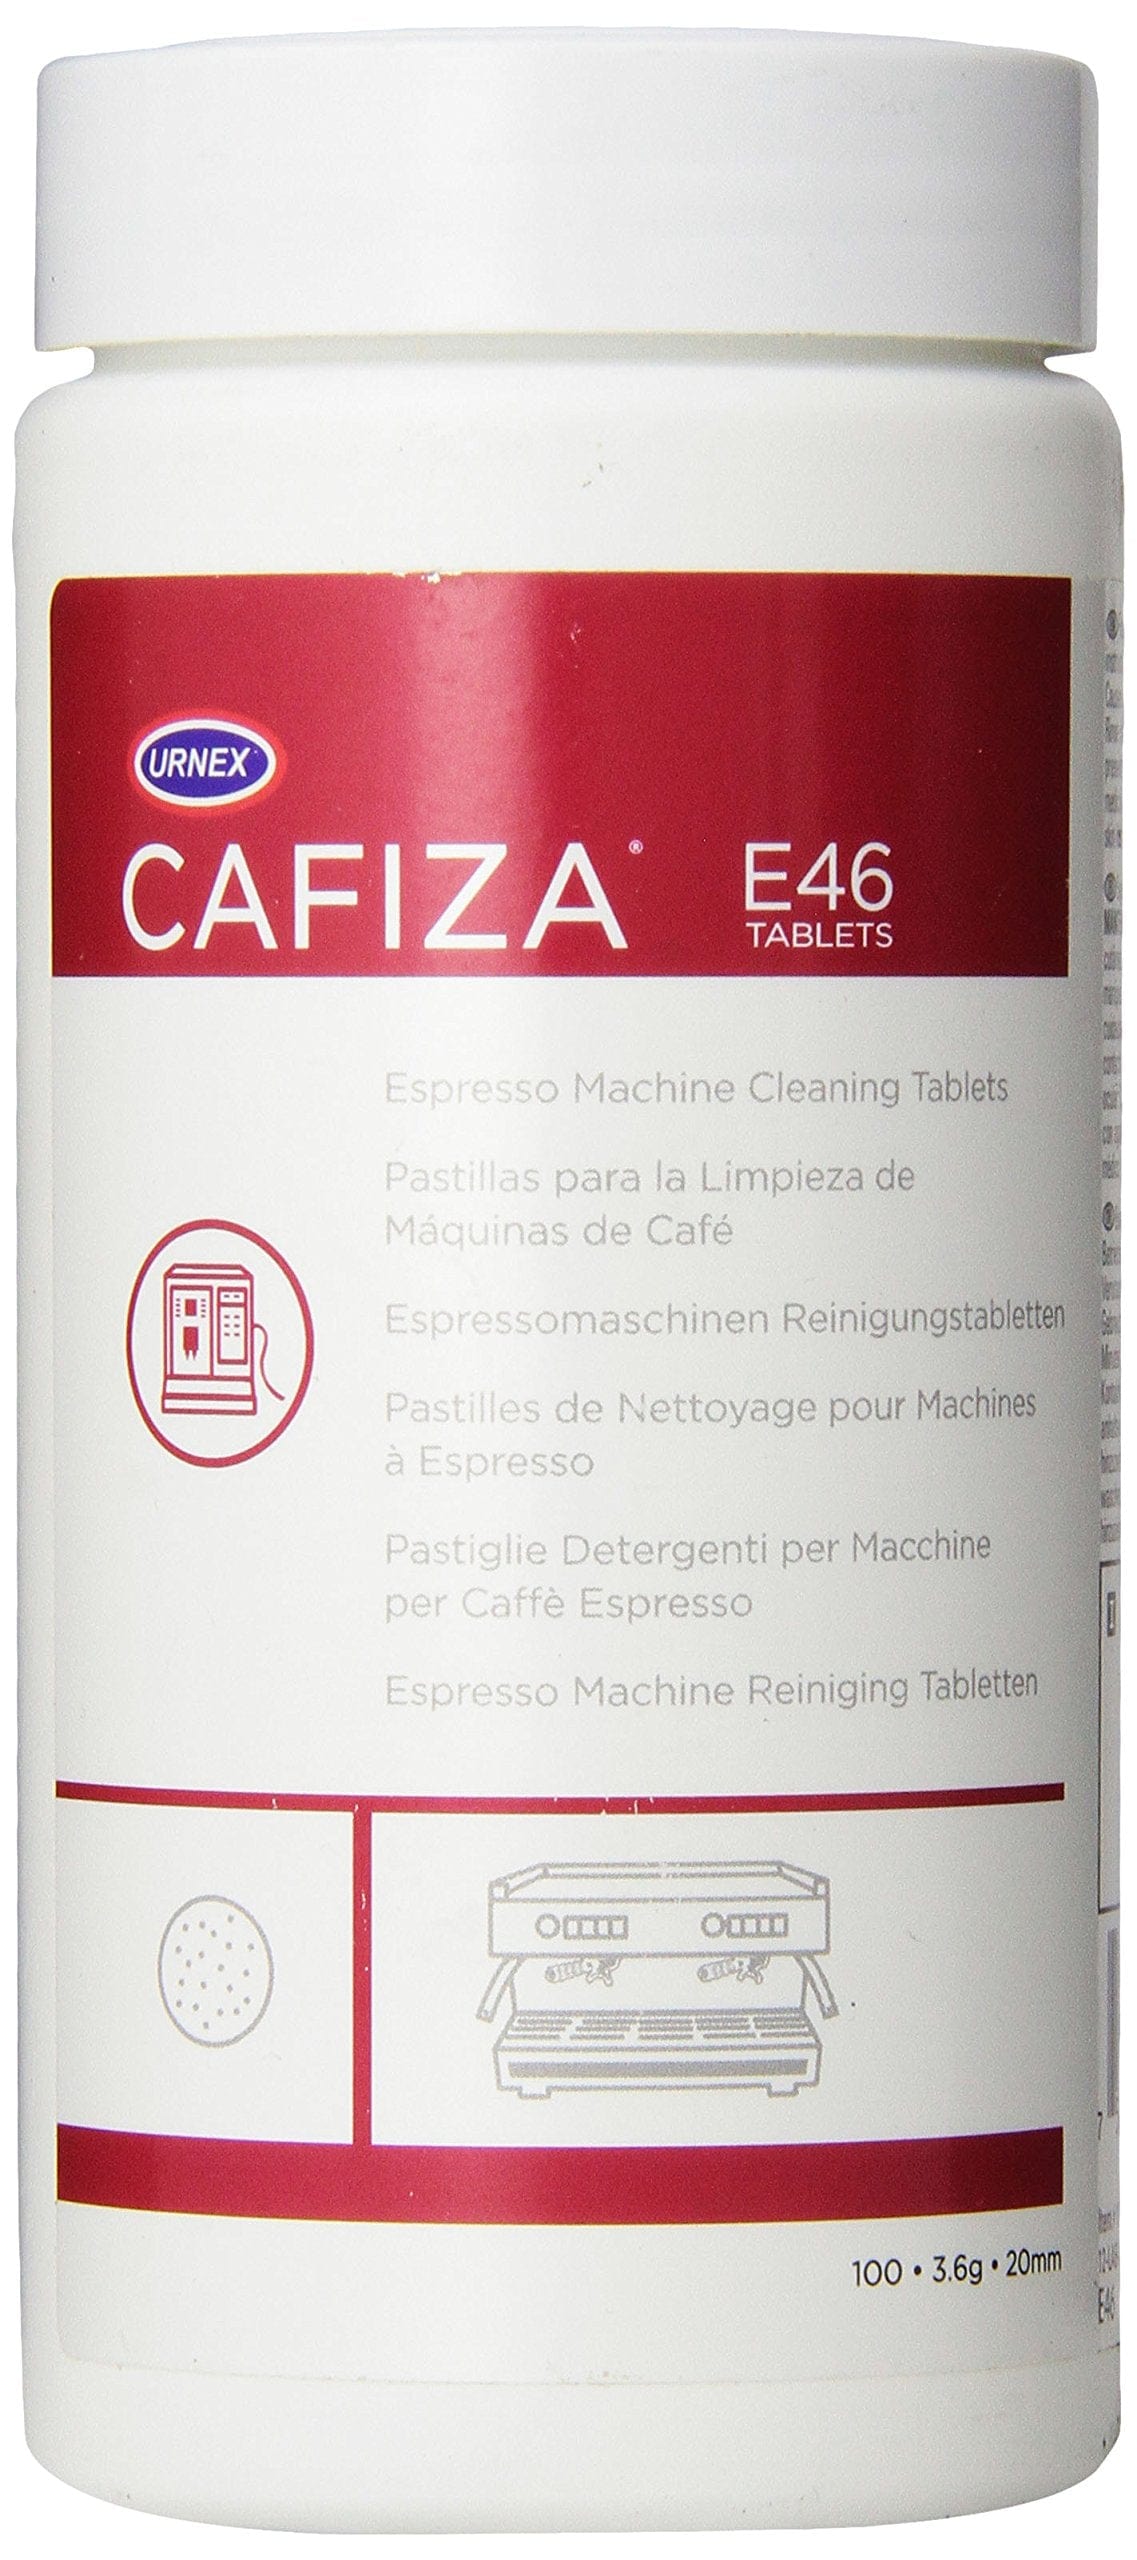 Urnex Cleaning Equipment Urnex Cafiza E46 Tablet - For Fully Automatic Coffee machine (100 Tablets)